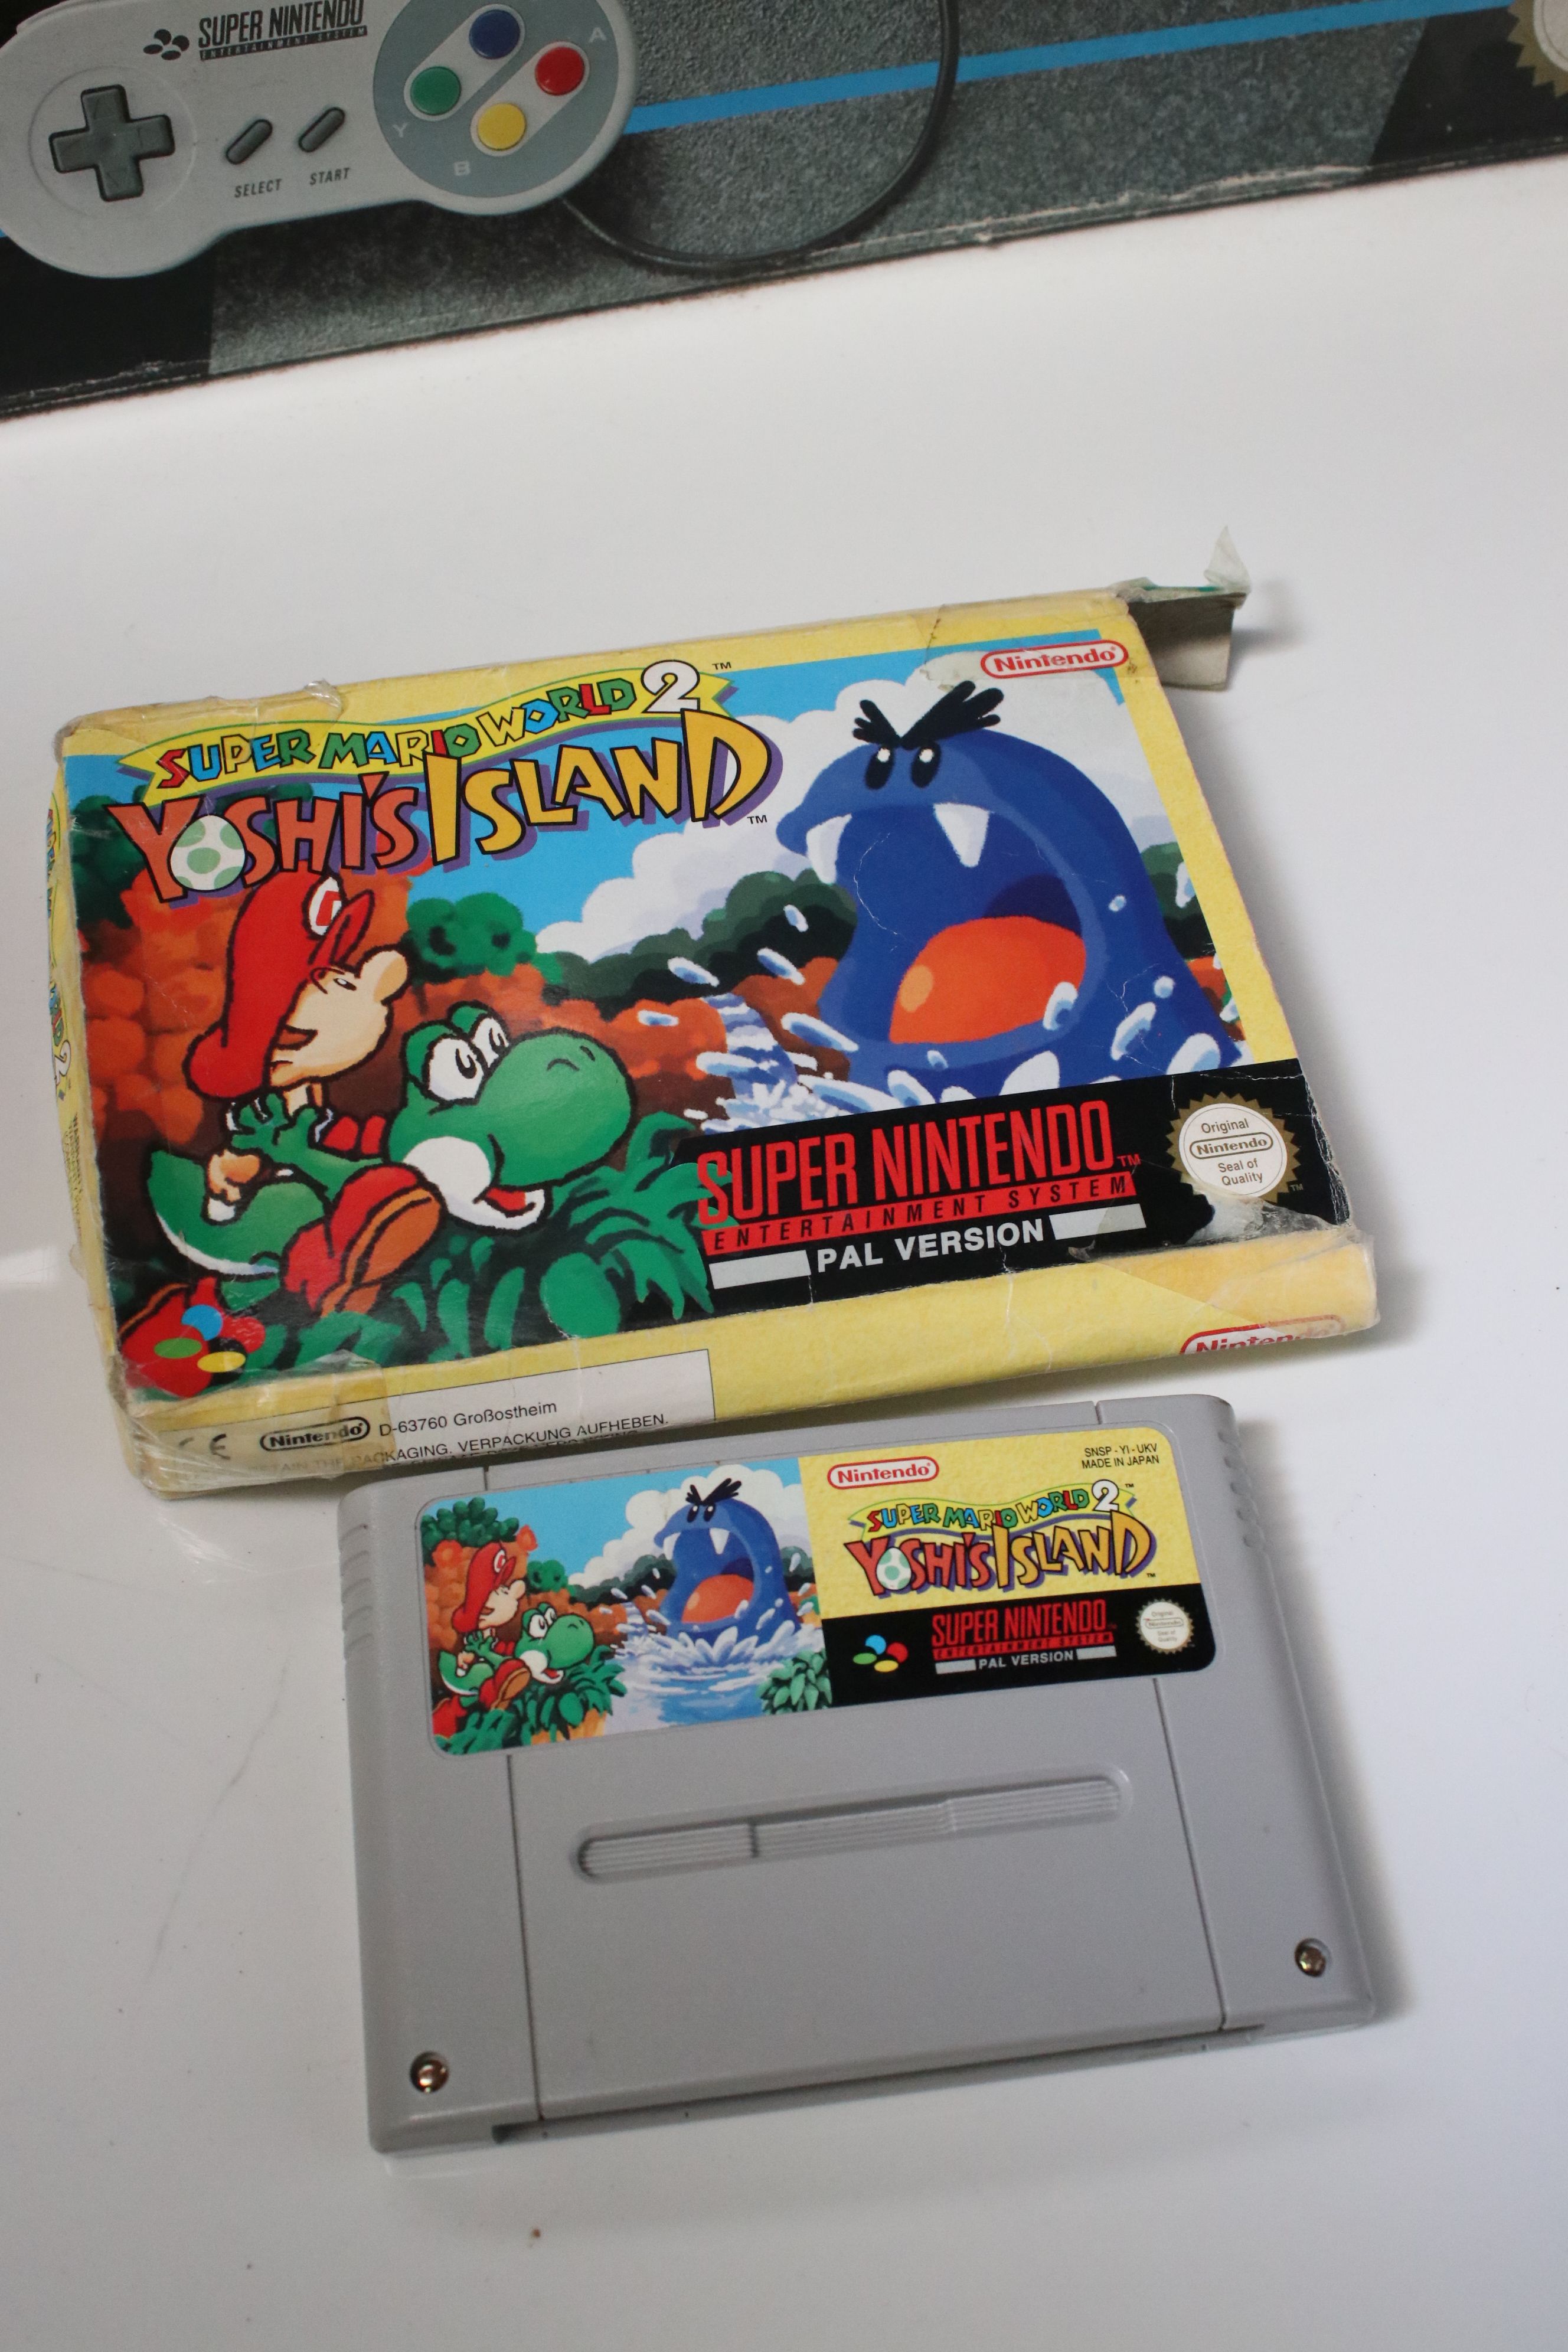 Retro Gaming - Boxed Super Nintendo SNES console with one controller and Super Mario World cartridge - Image 4 of 10